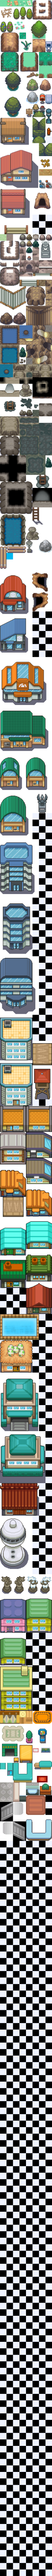 Outside_Tileset_WIP.png